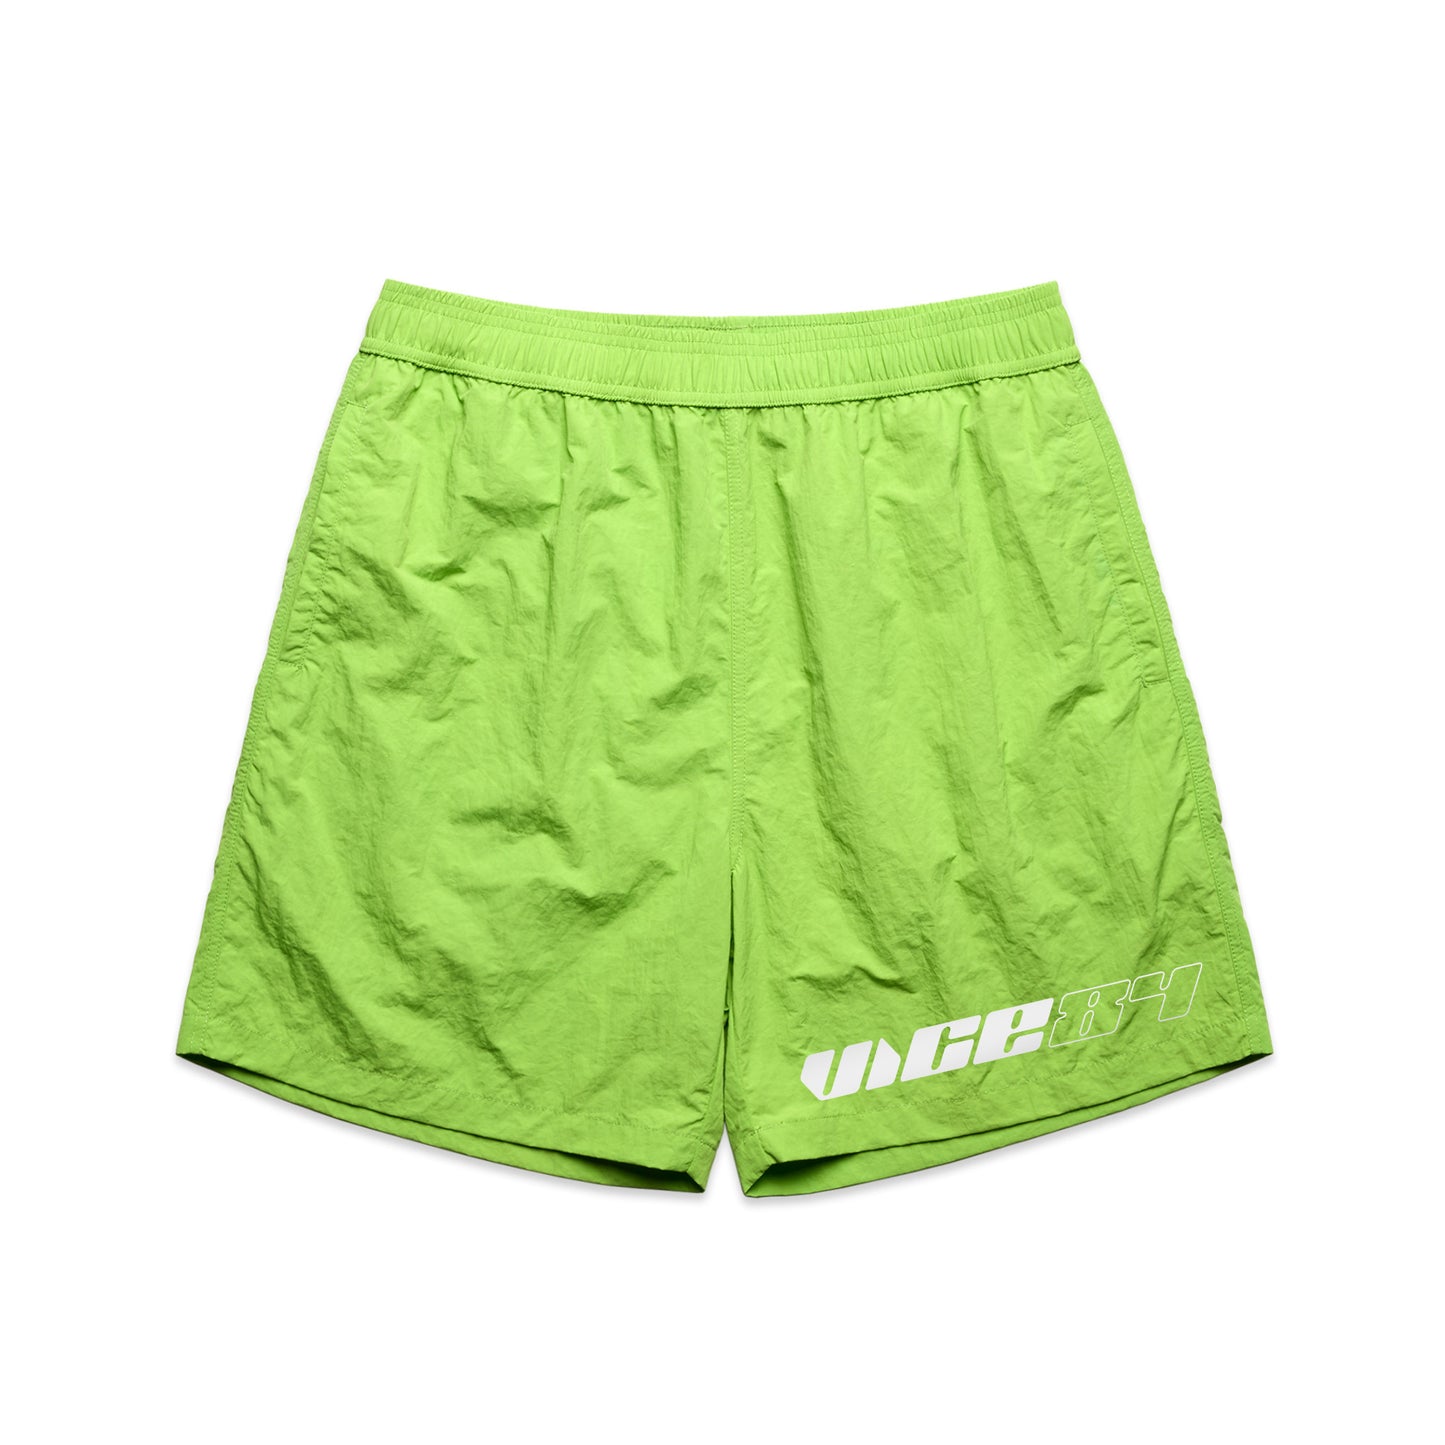 Vice 84 'Racer' Crinkle Recycled Swim Shorts - Citrus Lime